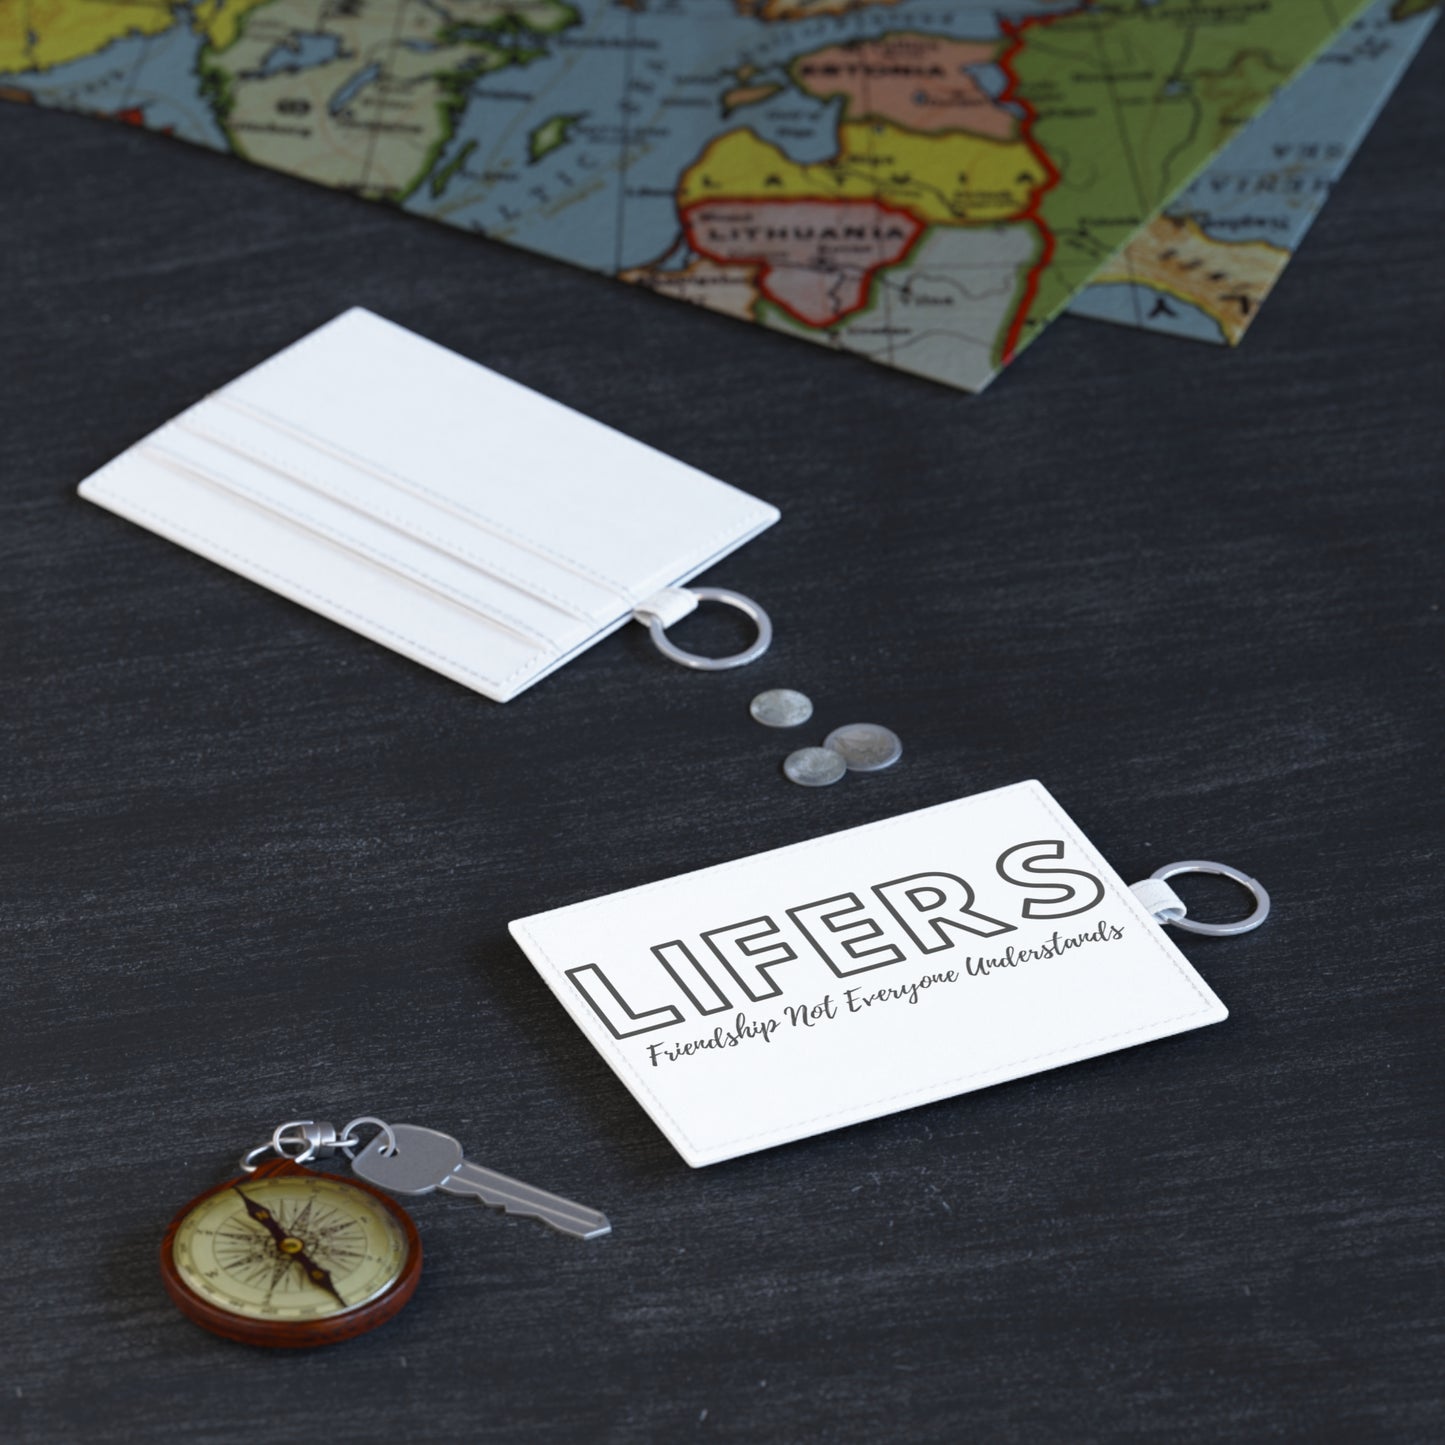 Lifers - Leather Card Holder